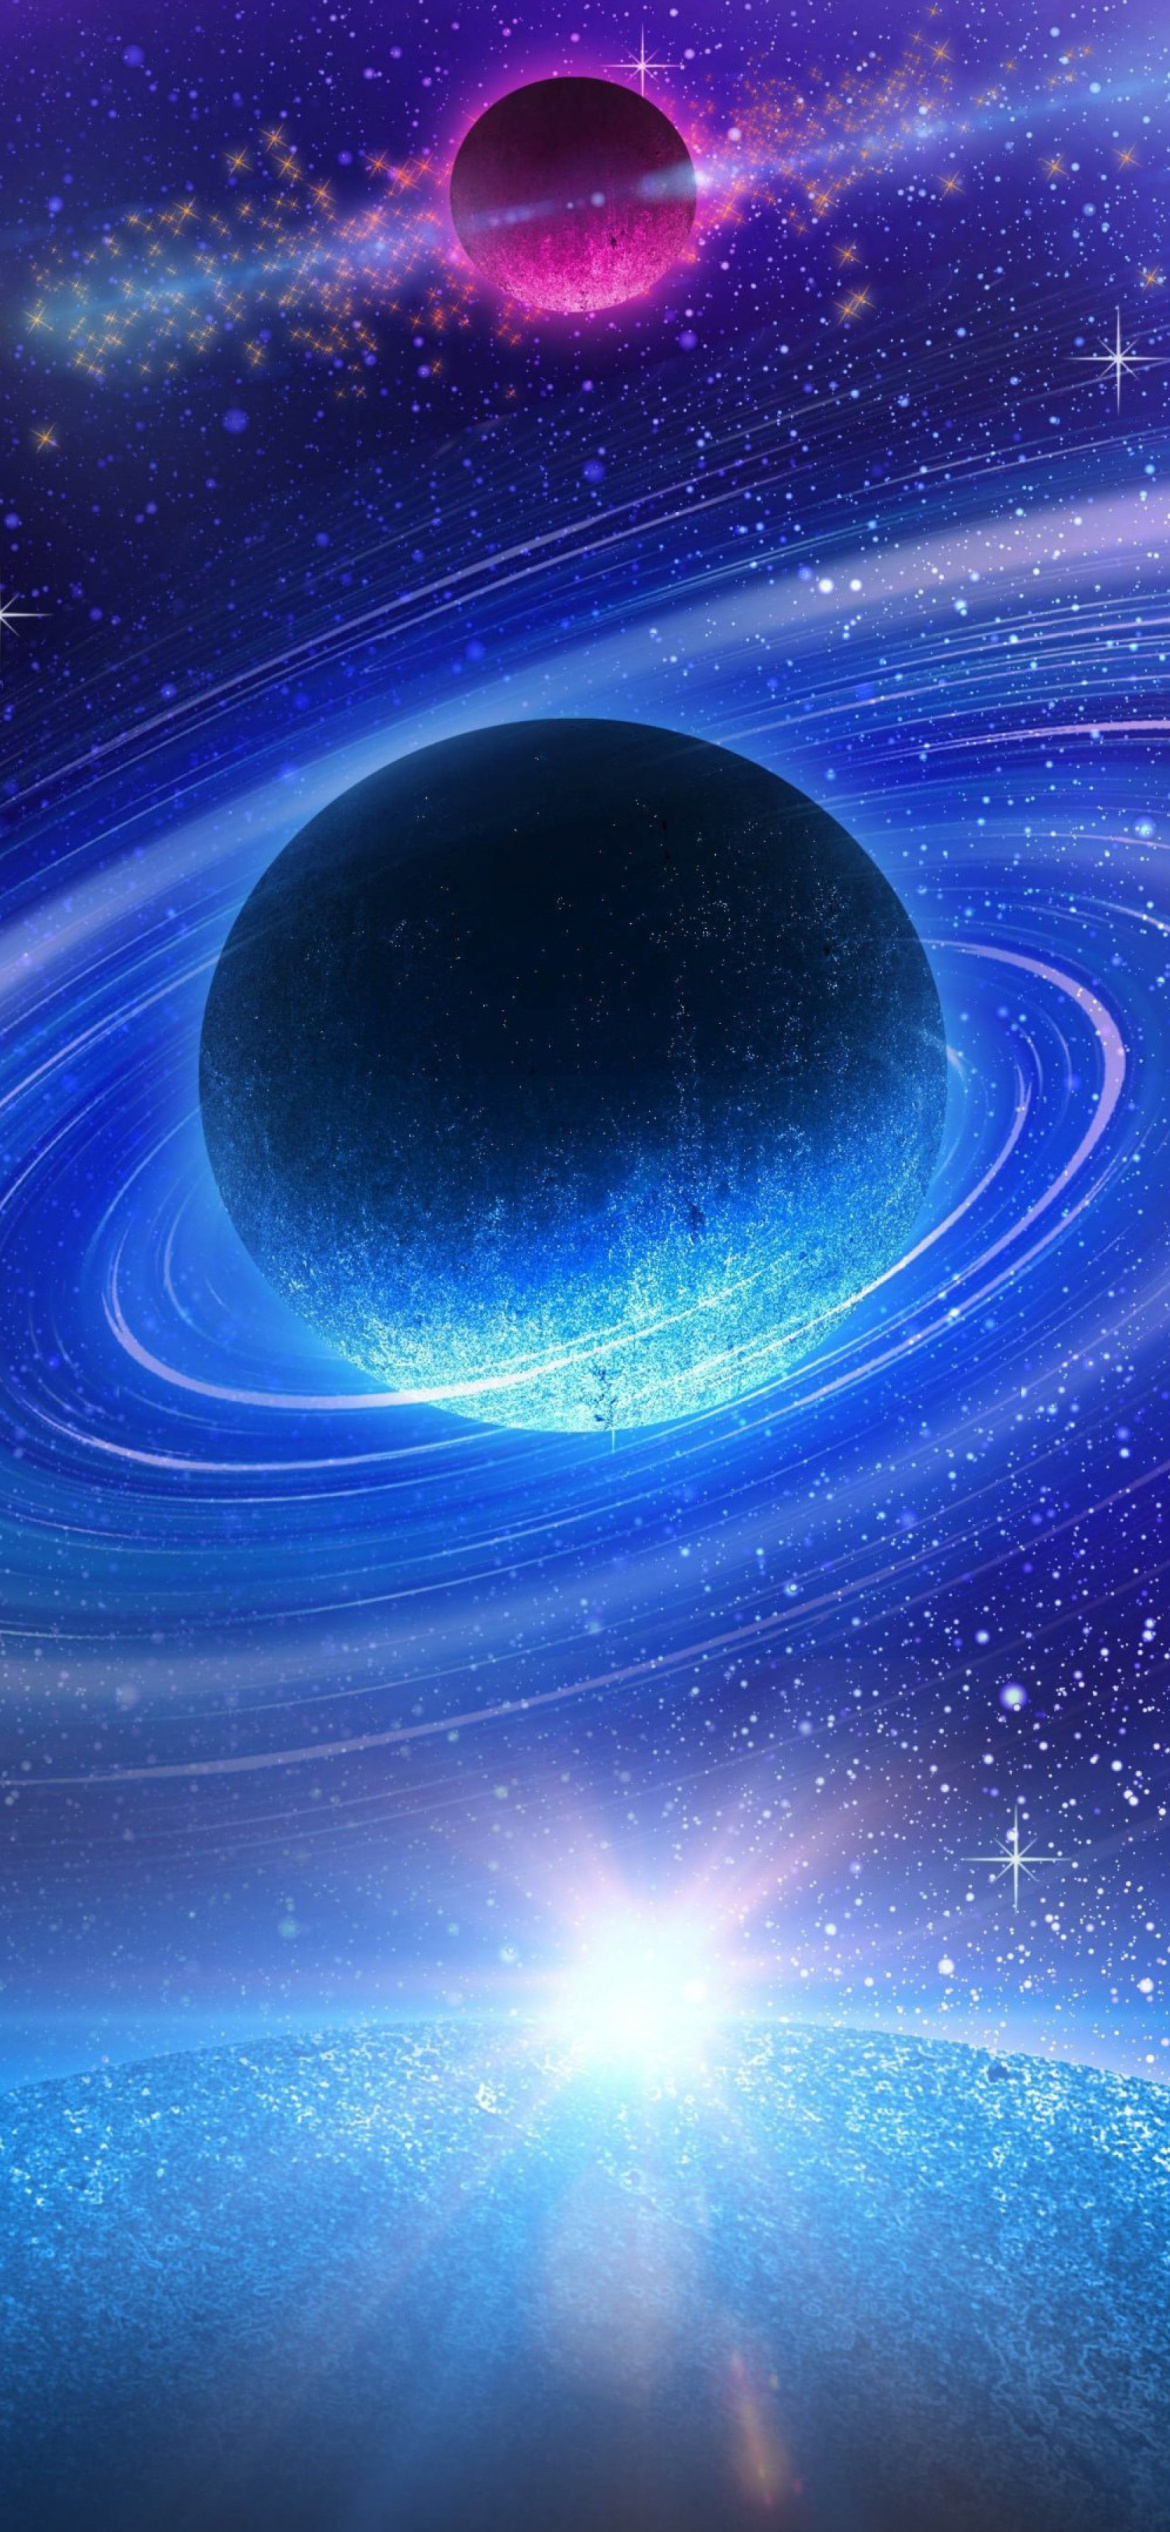 Planet with rings wallpaper 1170x2532